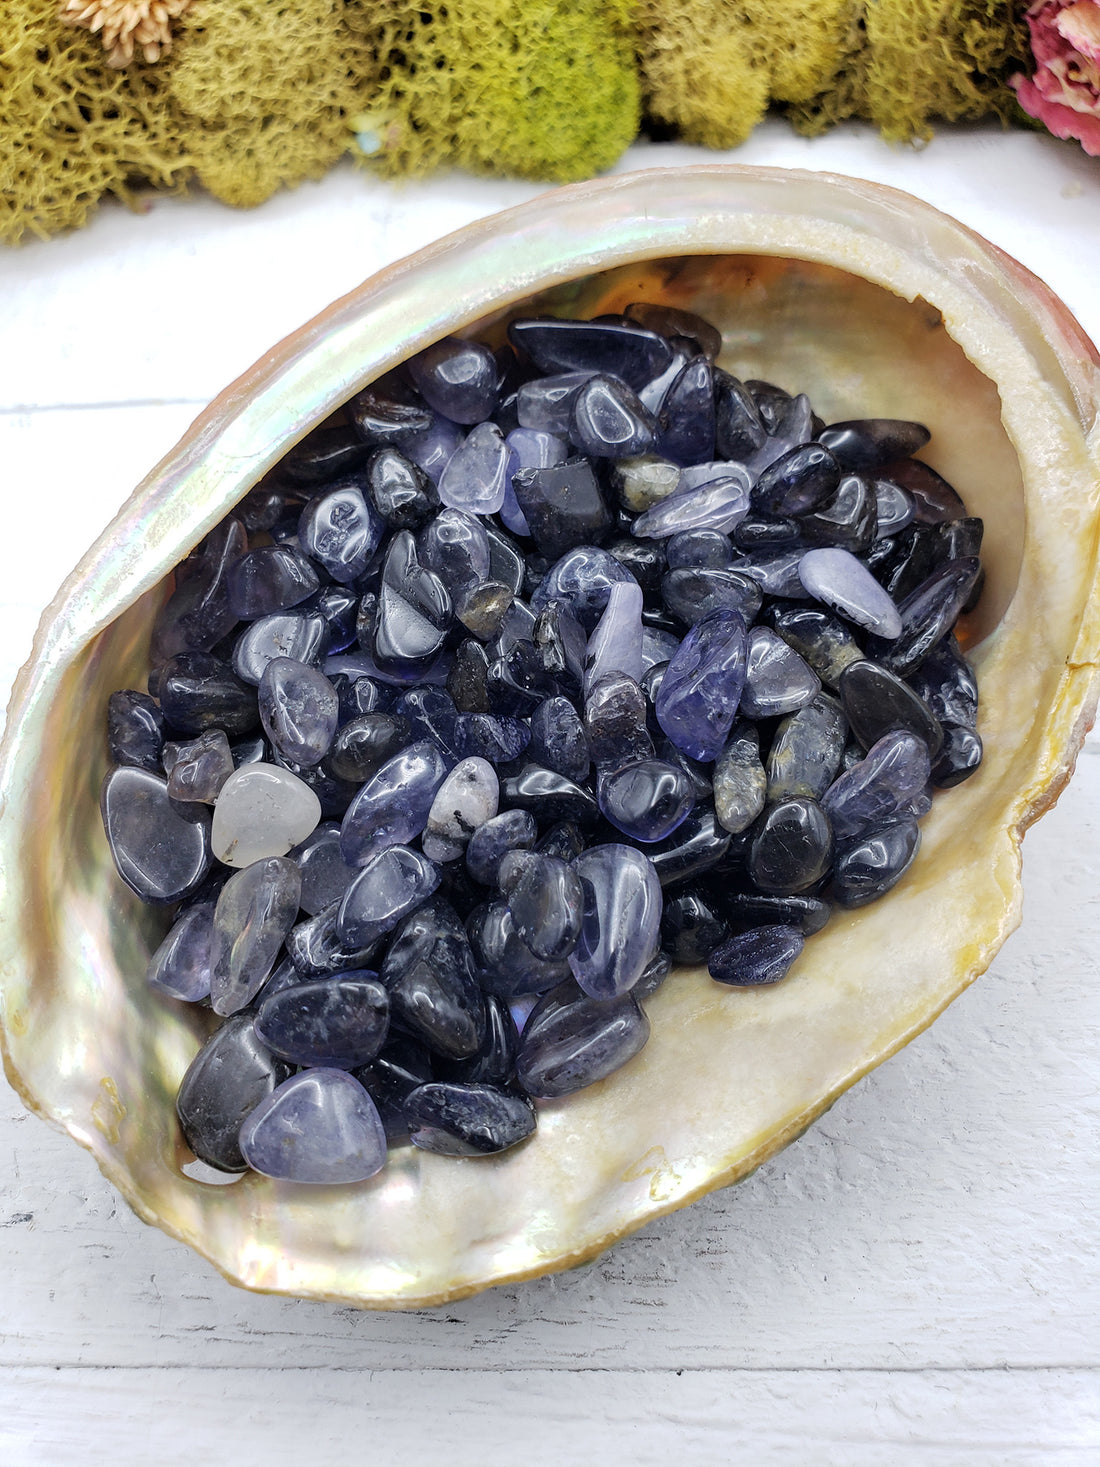 Three ounces of iolite crystal chips in abalone shell